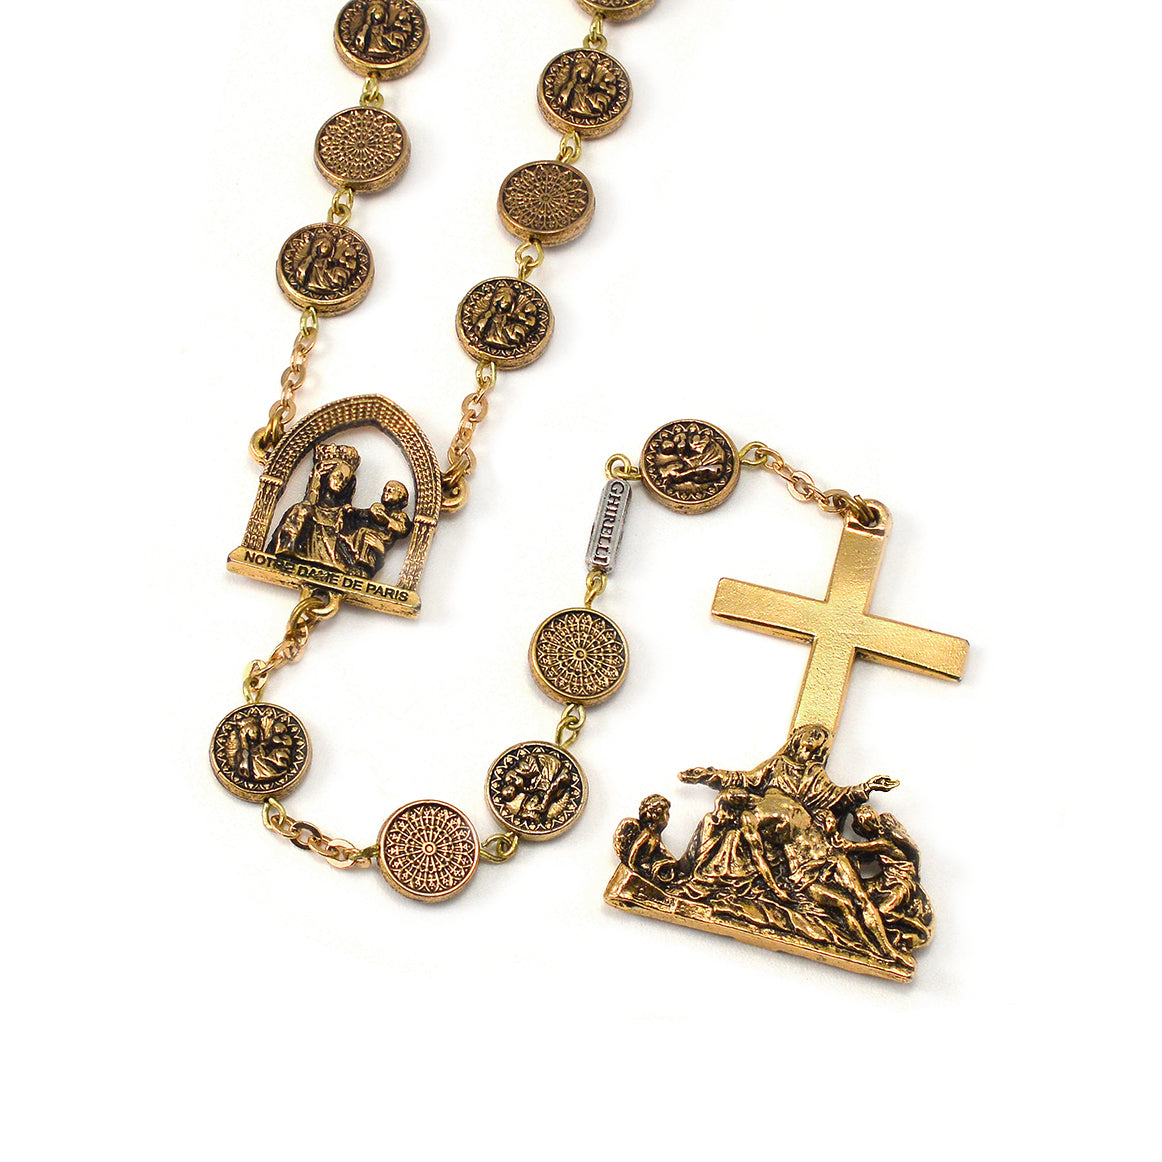 Notre Dame de Paris Cathedral Rosary with Rose Window Beads, Gold